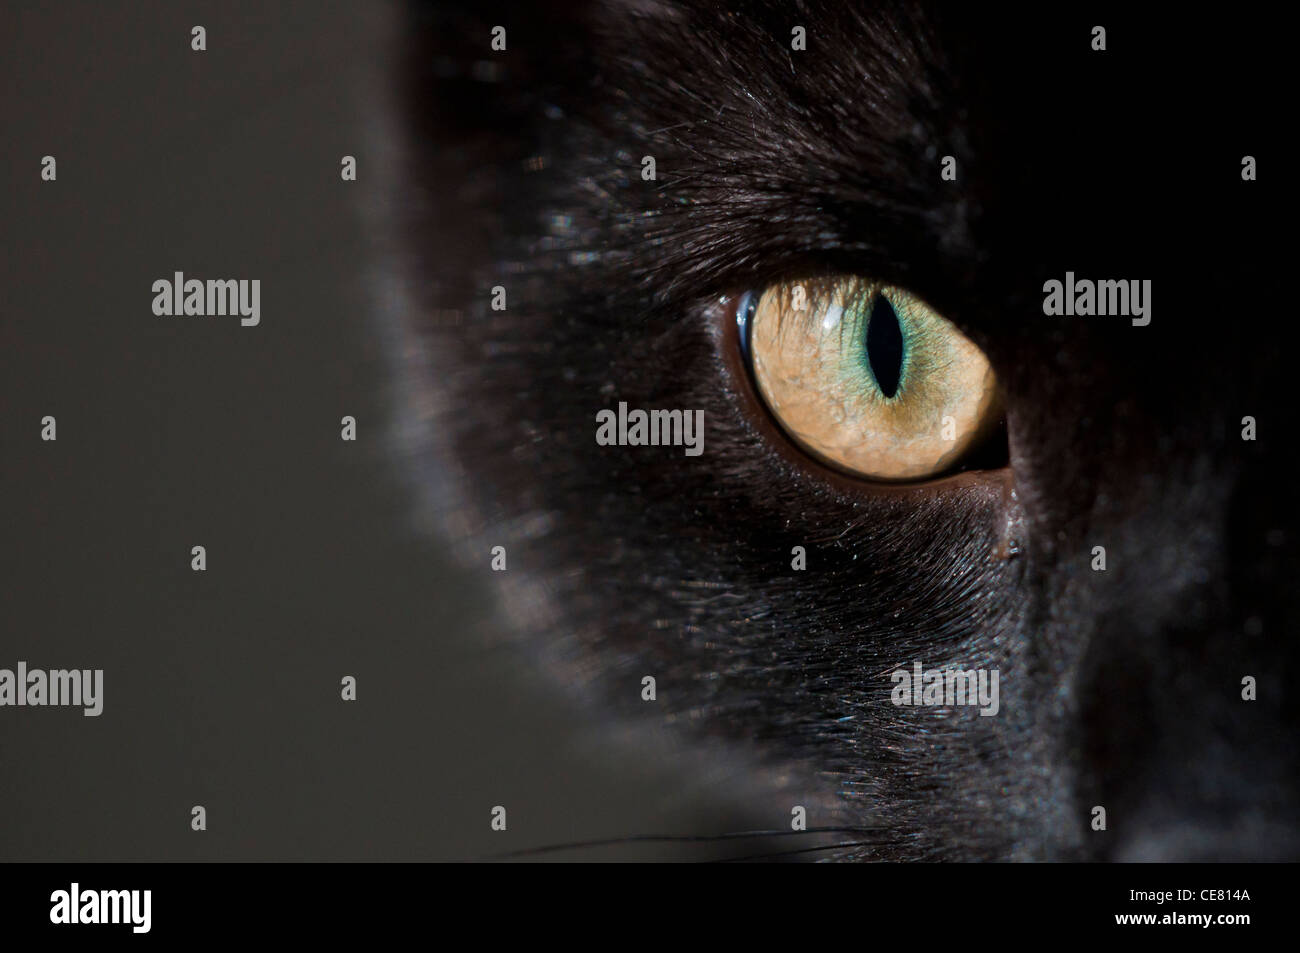 Cat's Eye of a British short-haired black cat. Stock Photo